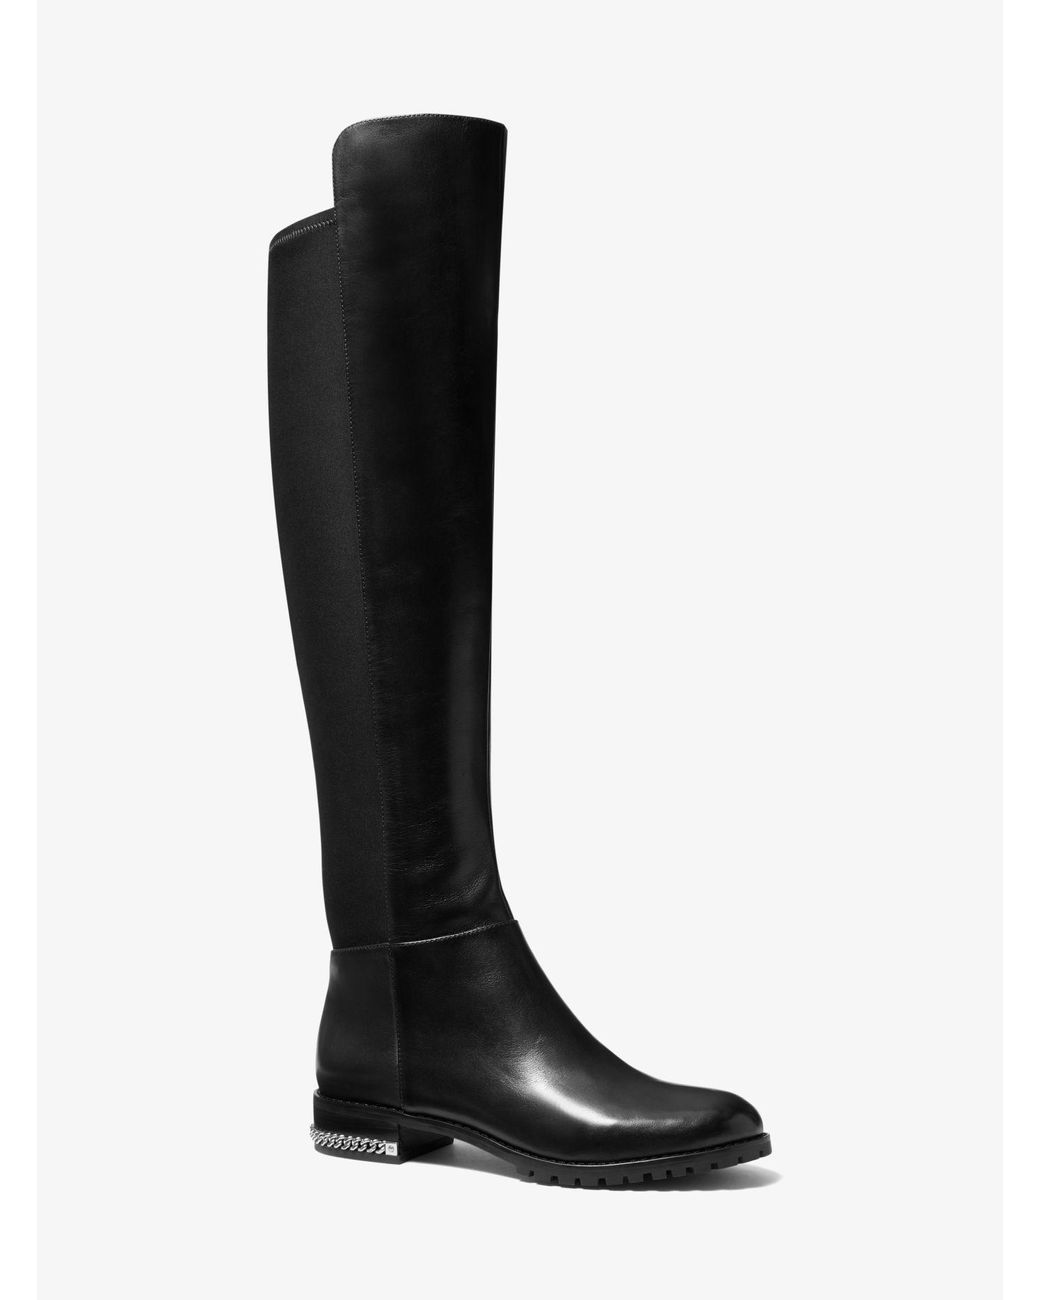 Michael Kors Sabrina Stretch Leather Boot in Black | Lyst